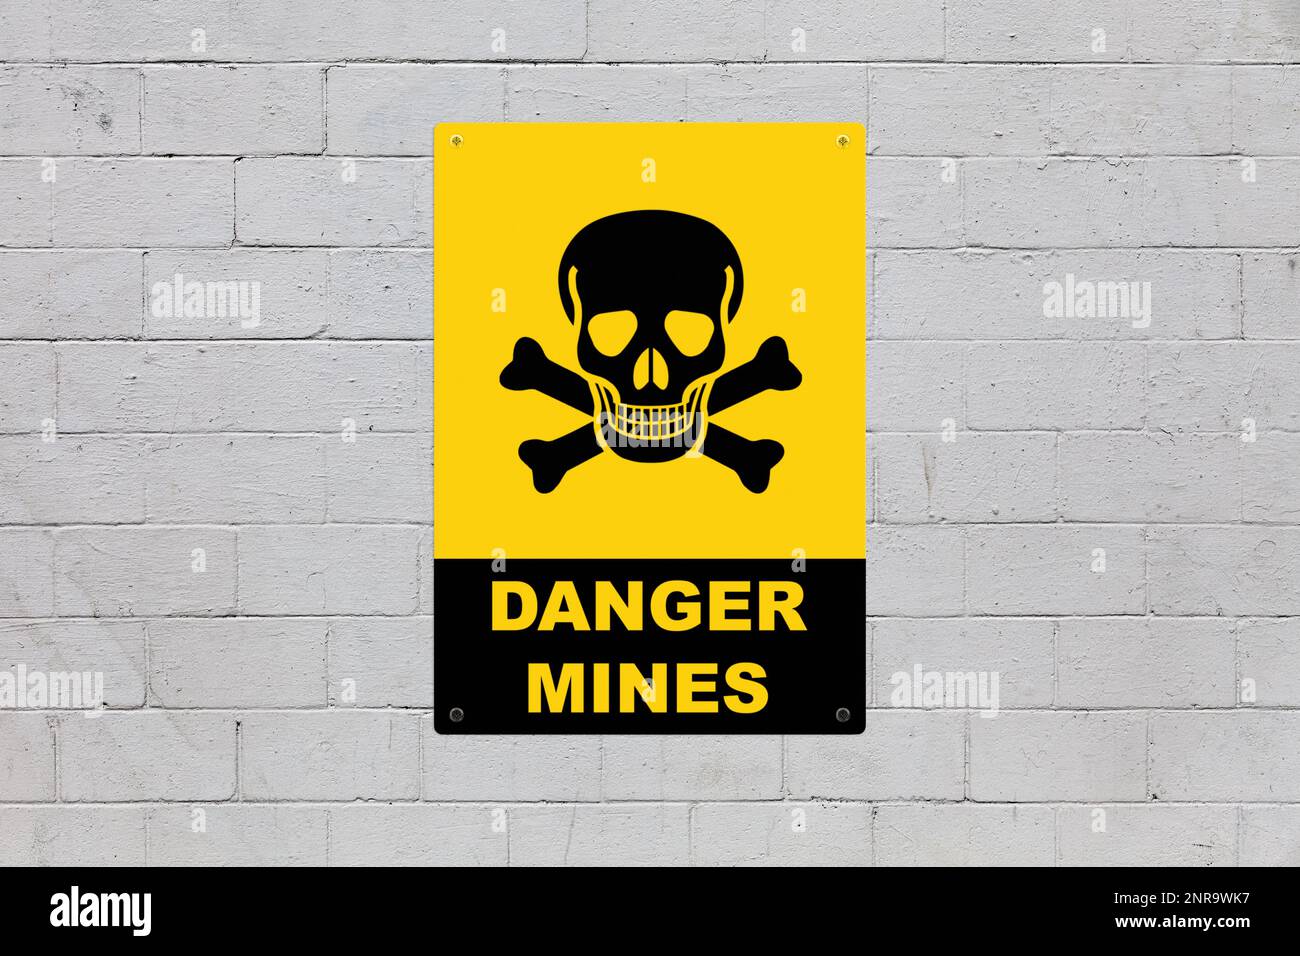 Yellow warning sign screwed to a brick wall to warn about a threat. In the middle of the panel, there is a skull and bones symbol and the message sayi Stock Photo